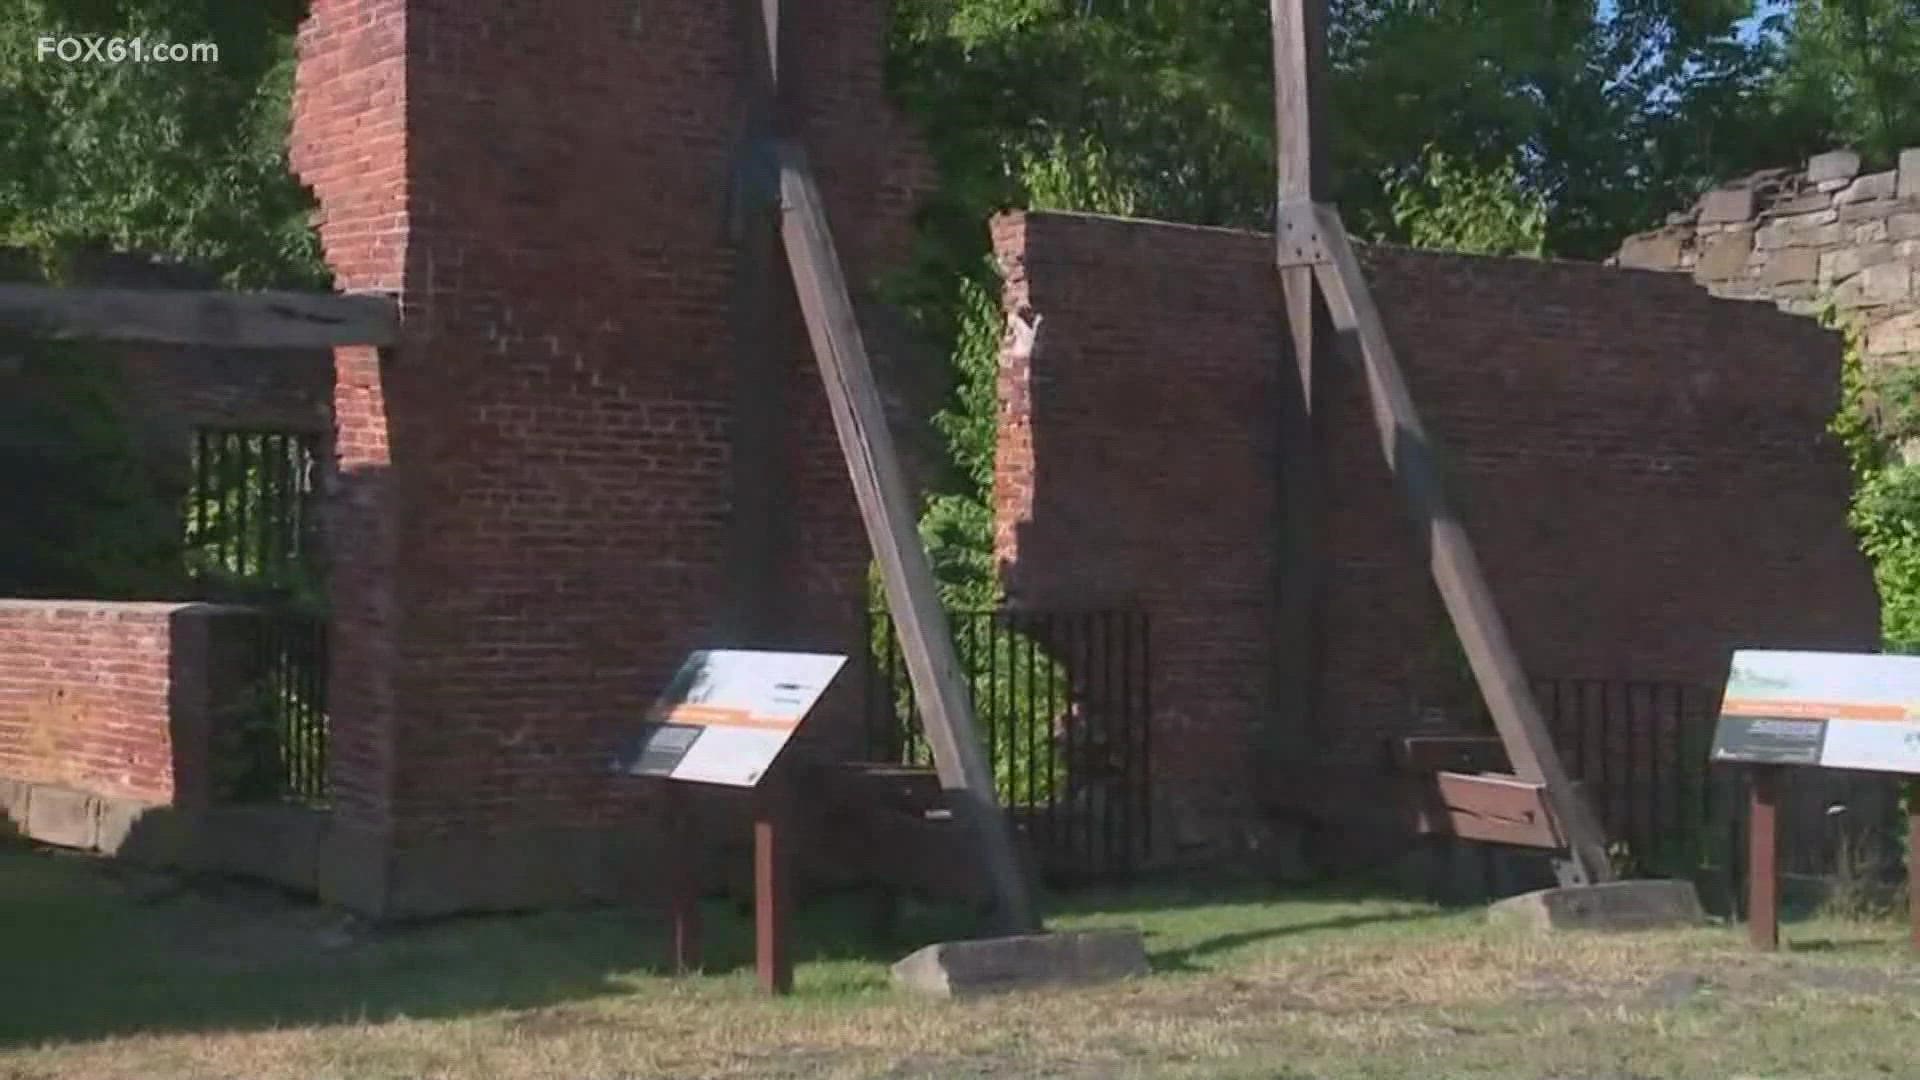 Kids 18 and under can visit the Old New Gate Prison and Copper Mine in East Granby for free with an adult who is a resident of Connecticut. It runs through Sept. 5.